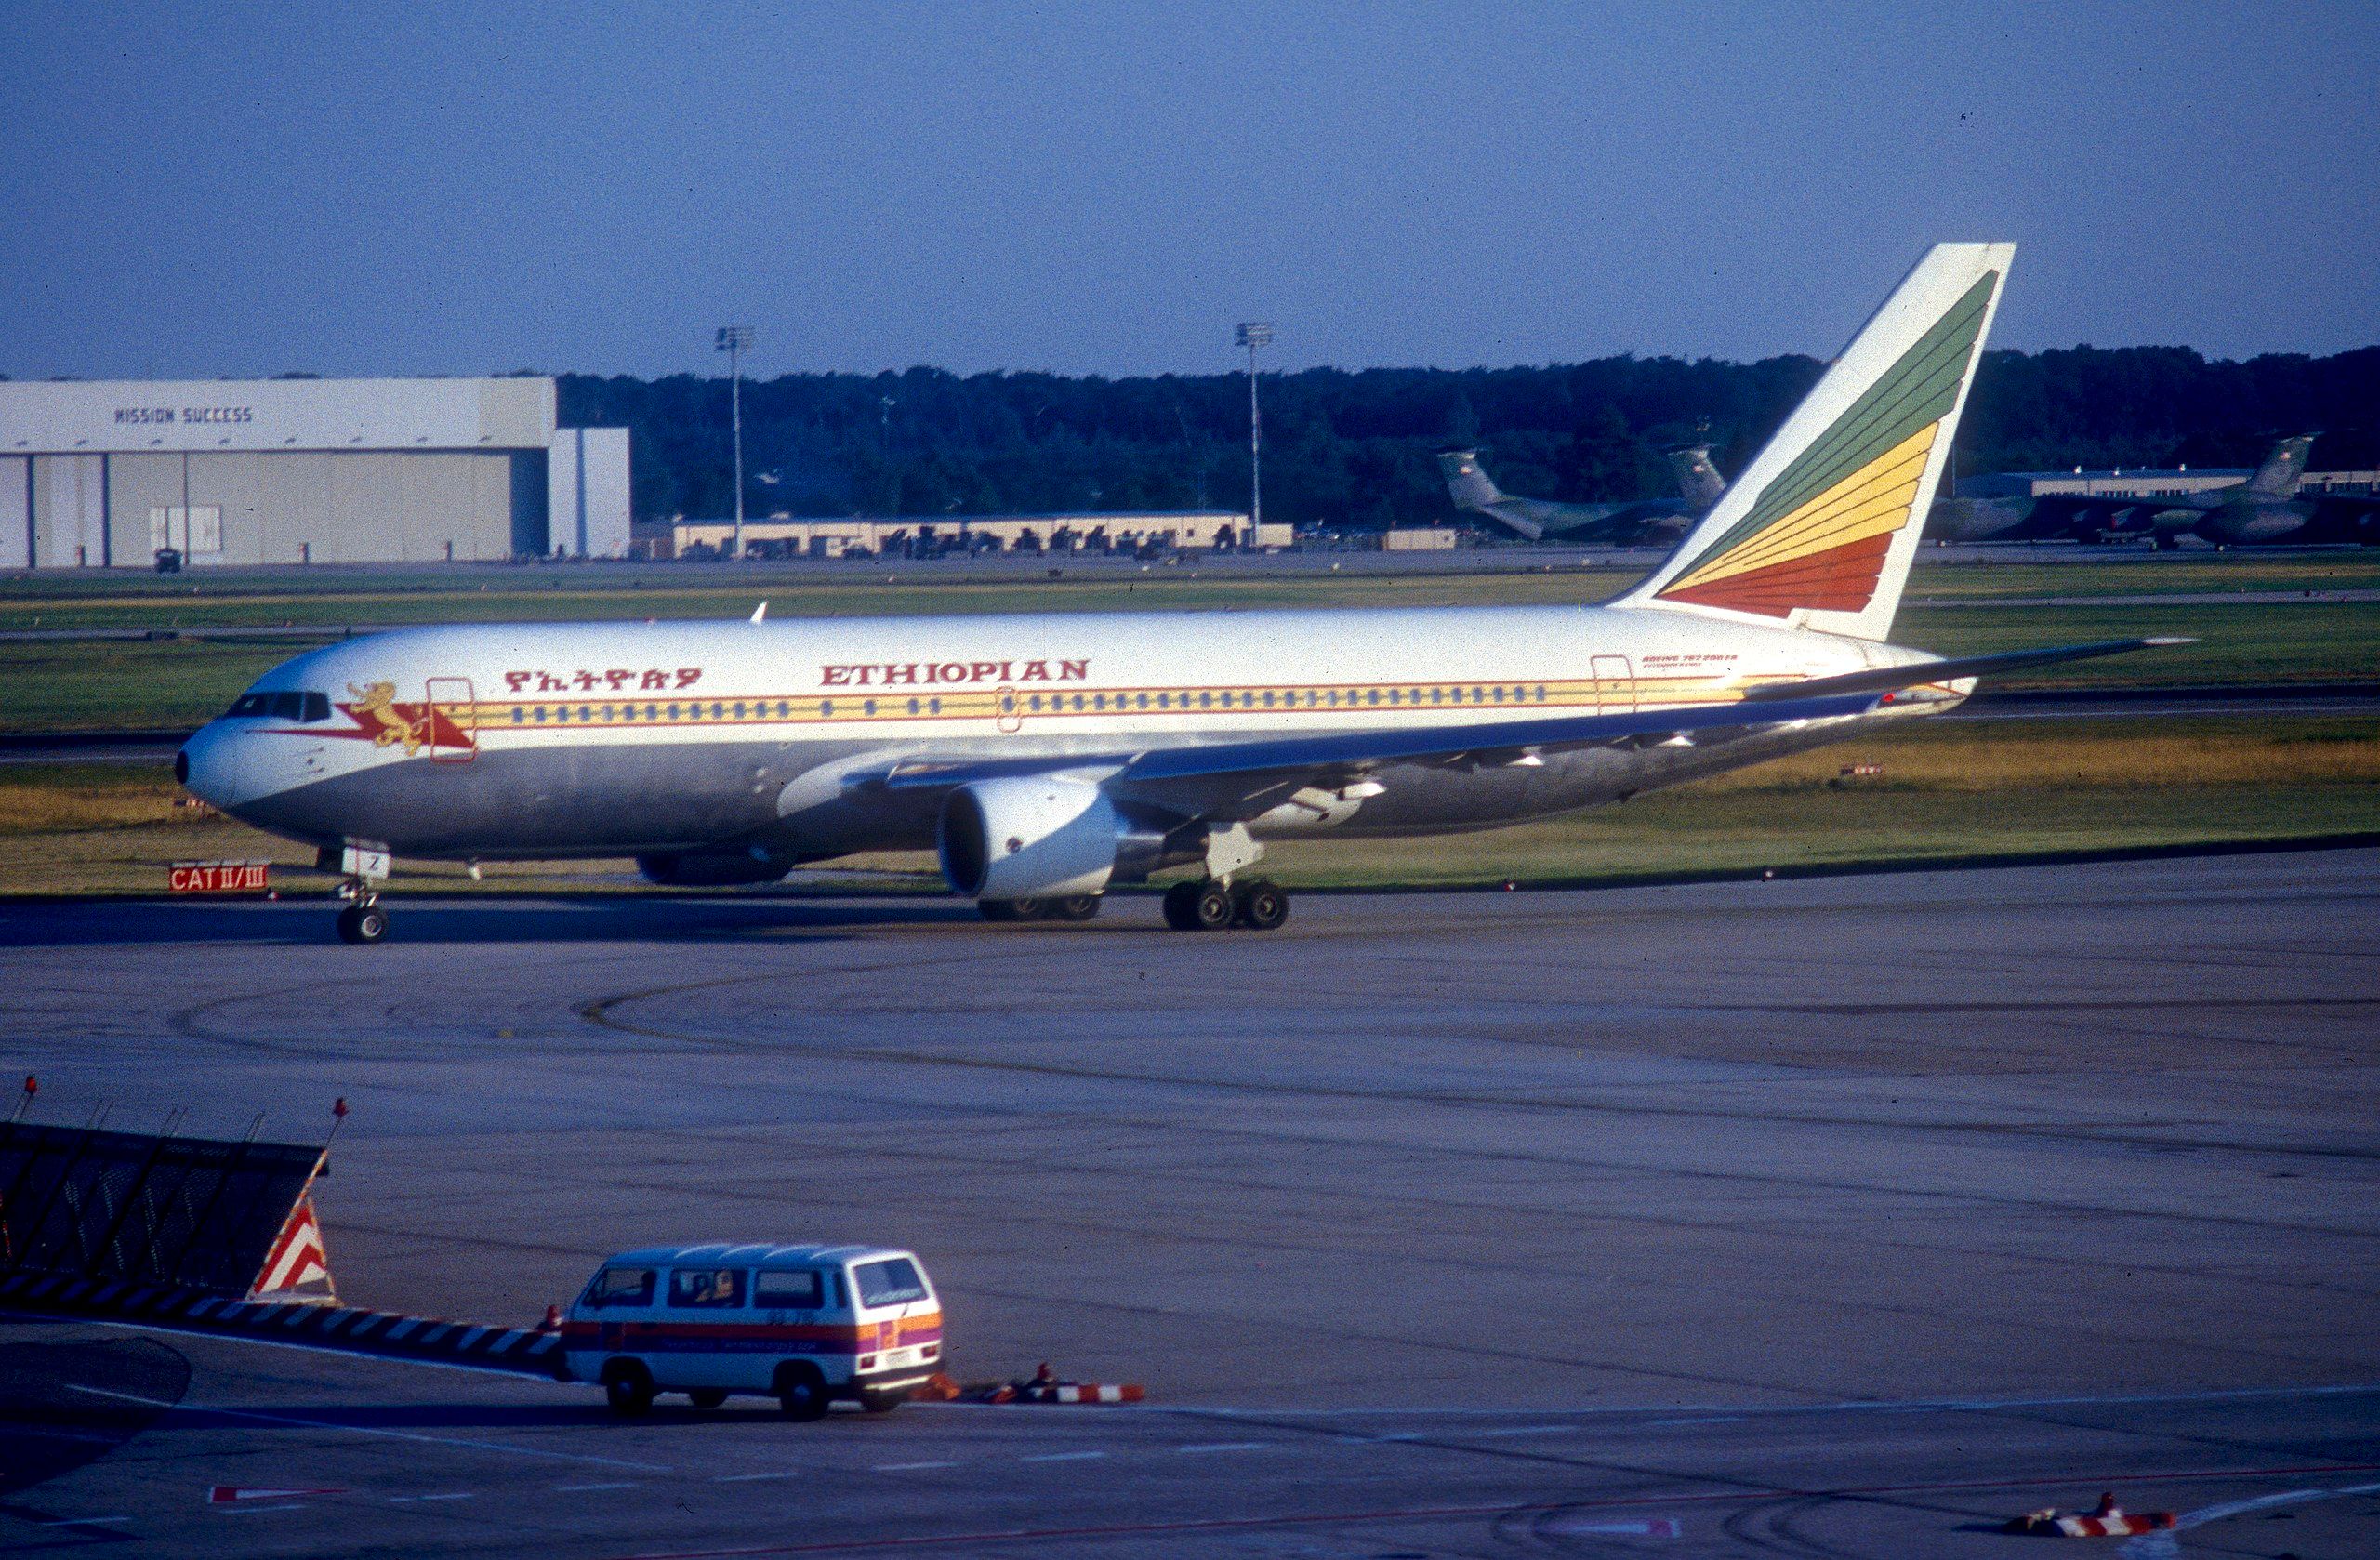 An Ethiopian Airlines Boeing 767-200ER taxiing to the runway.